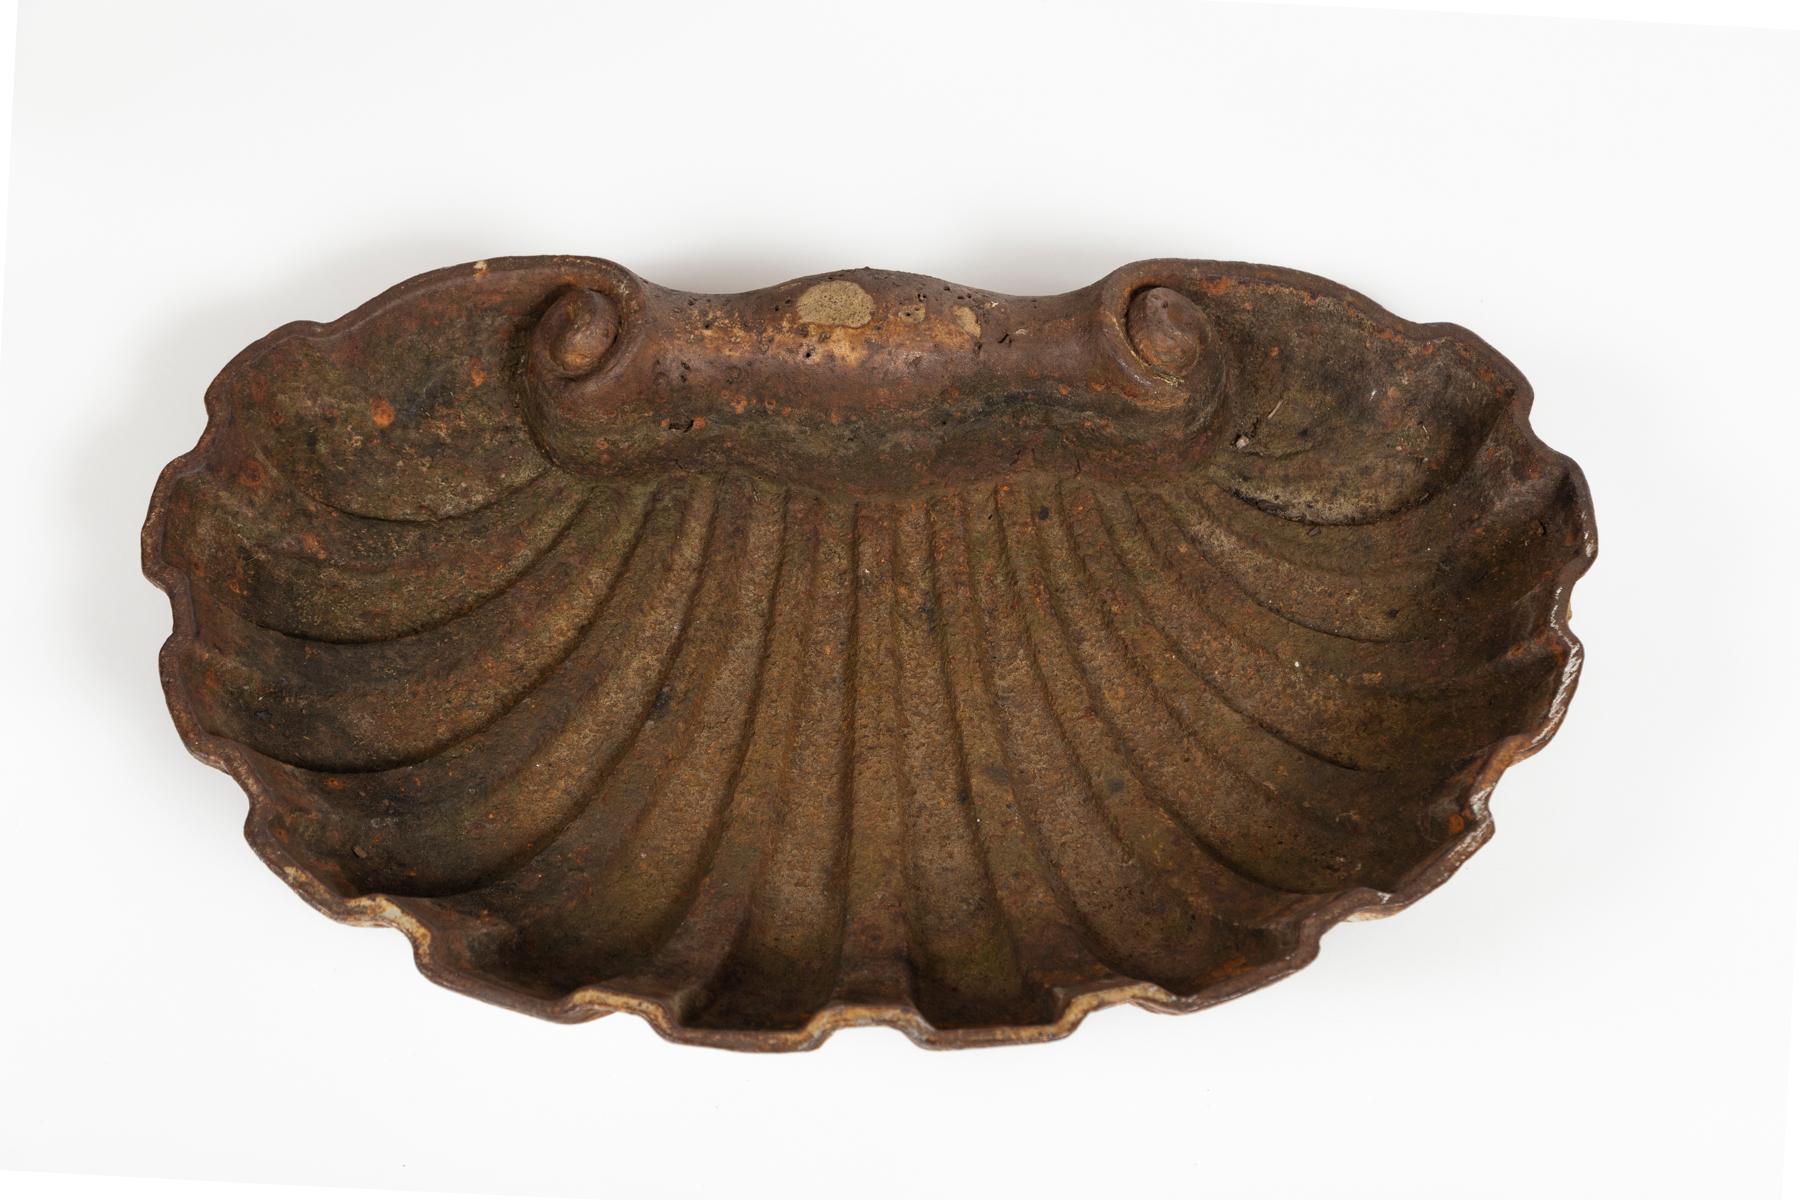 Cast Iron Shell Form Garden Ornament, circa 1920. Heavy cast piece, finely detailed. Aged patina.